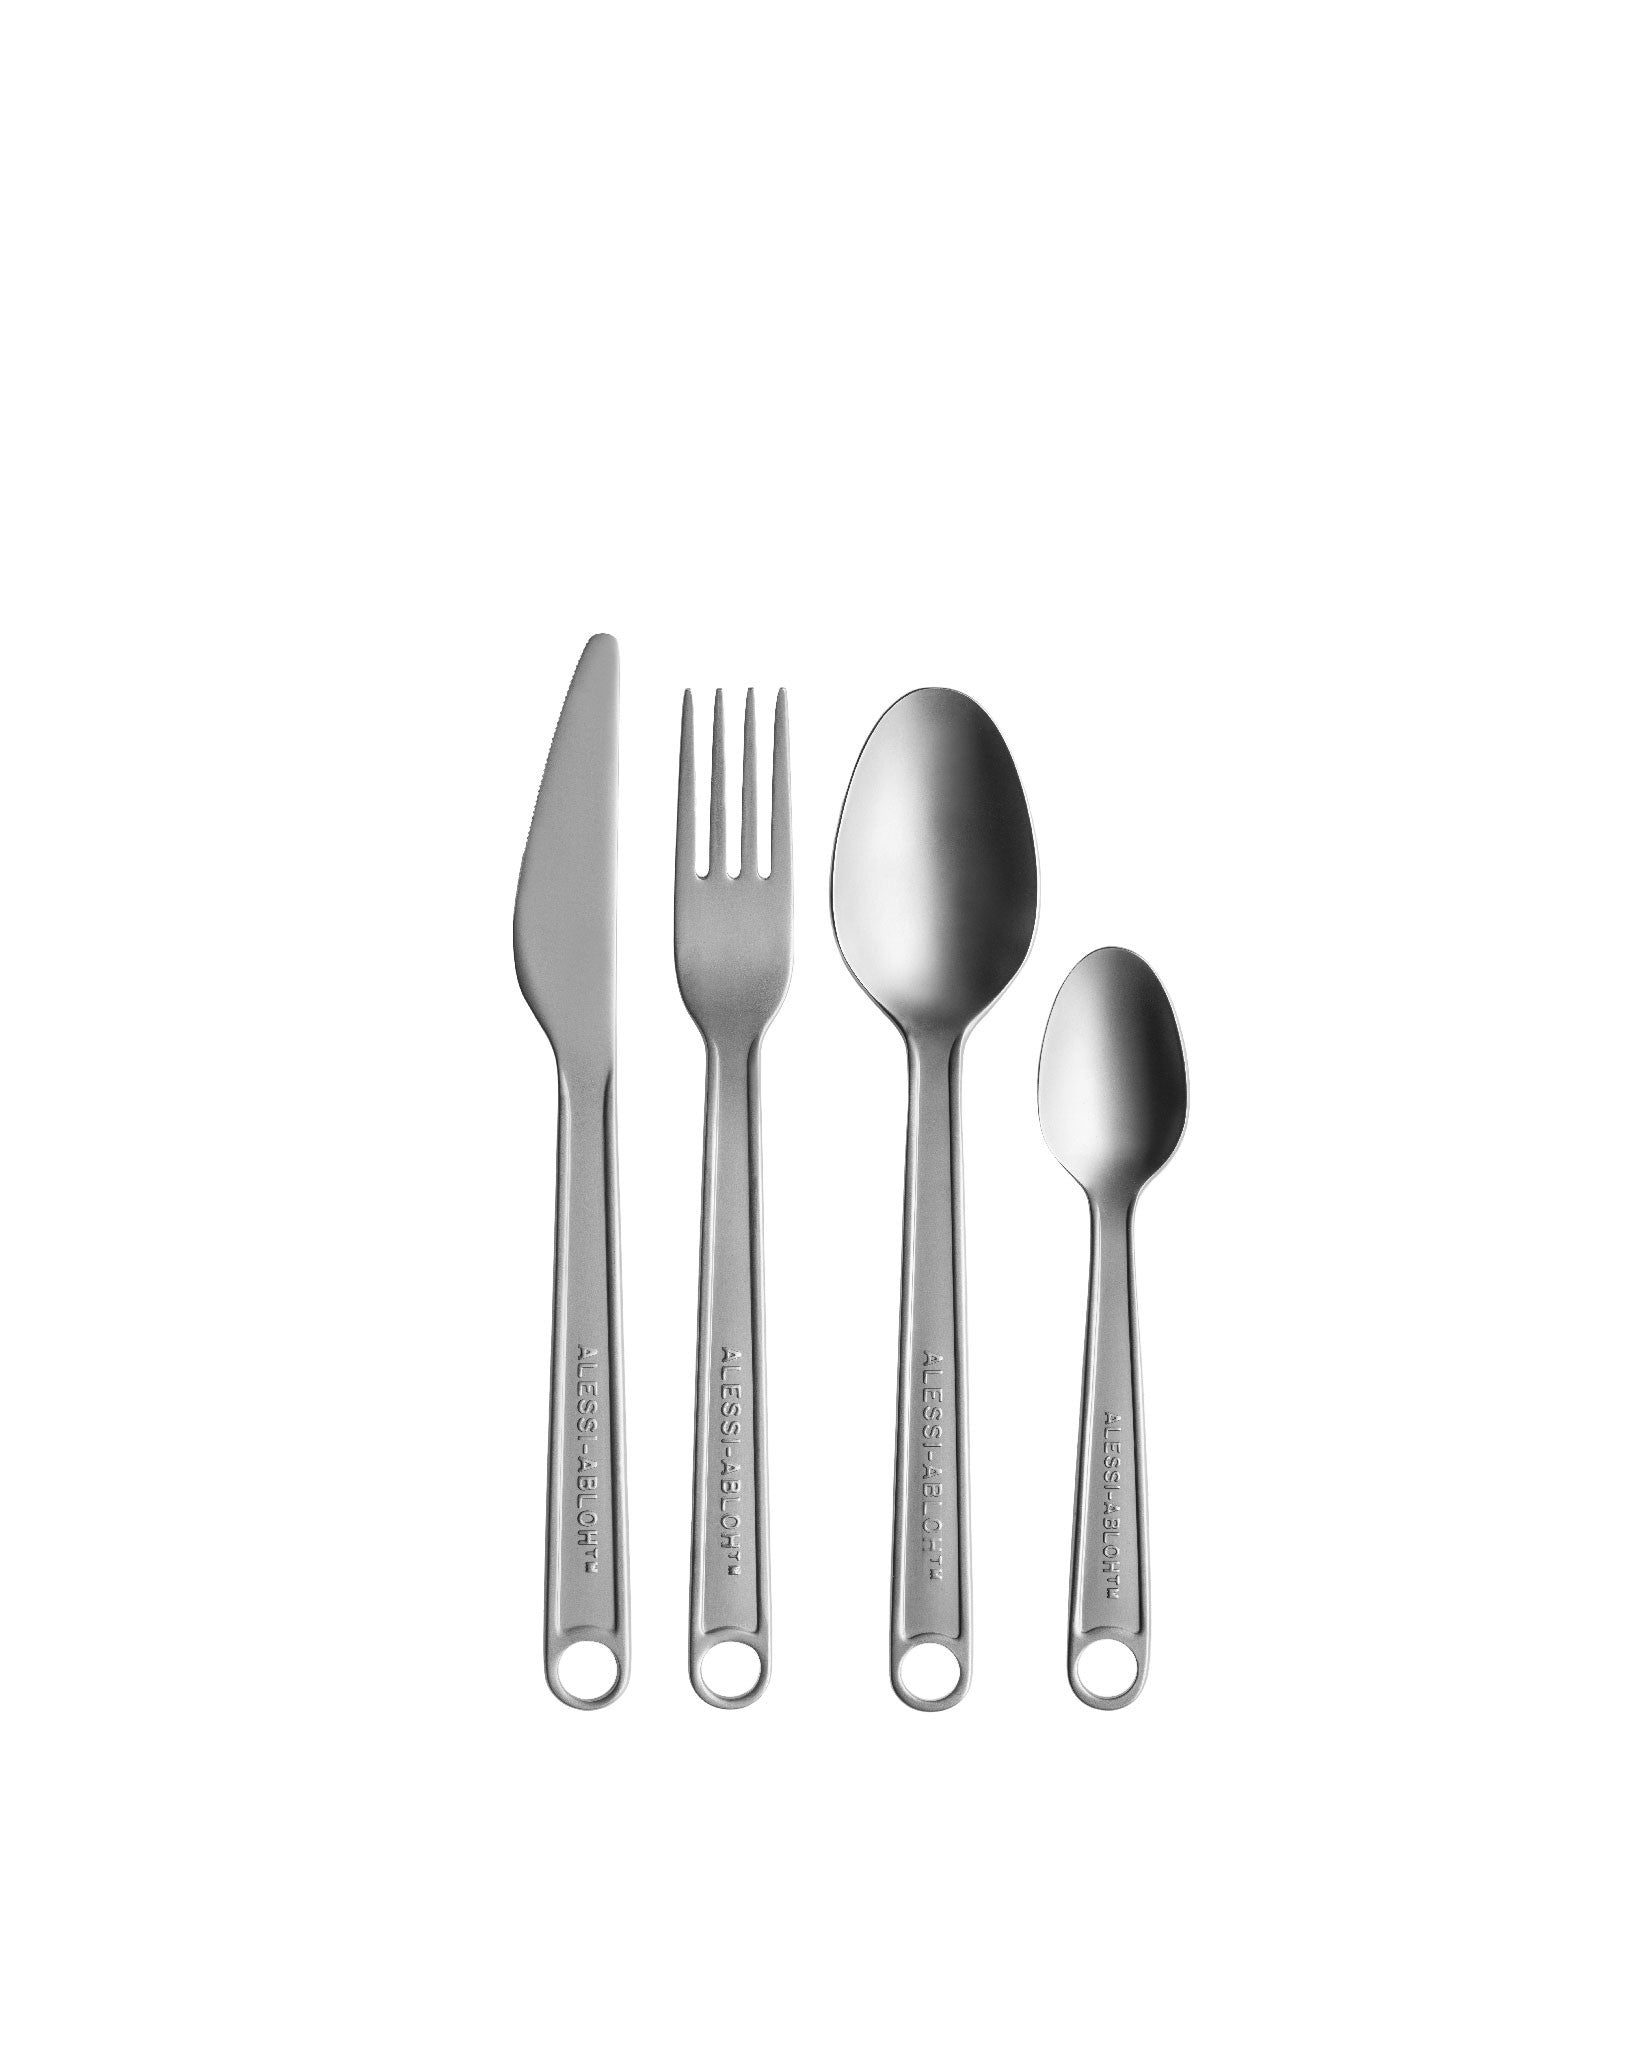 Occasional Object Cutlery Set 3-Piece VA01 Alessi